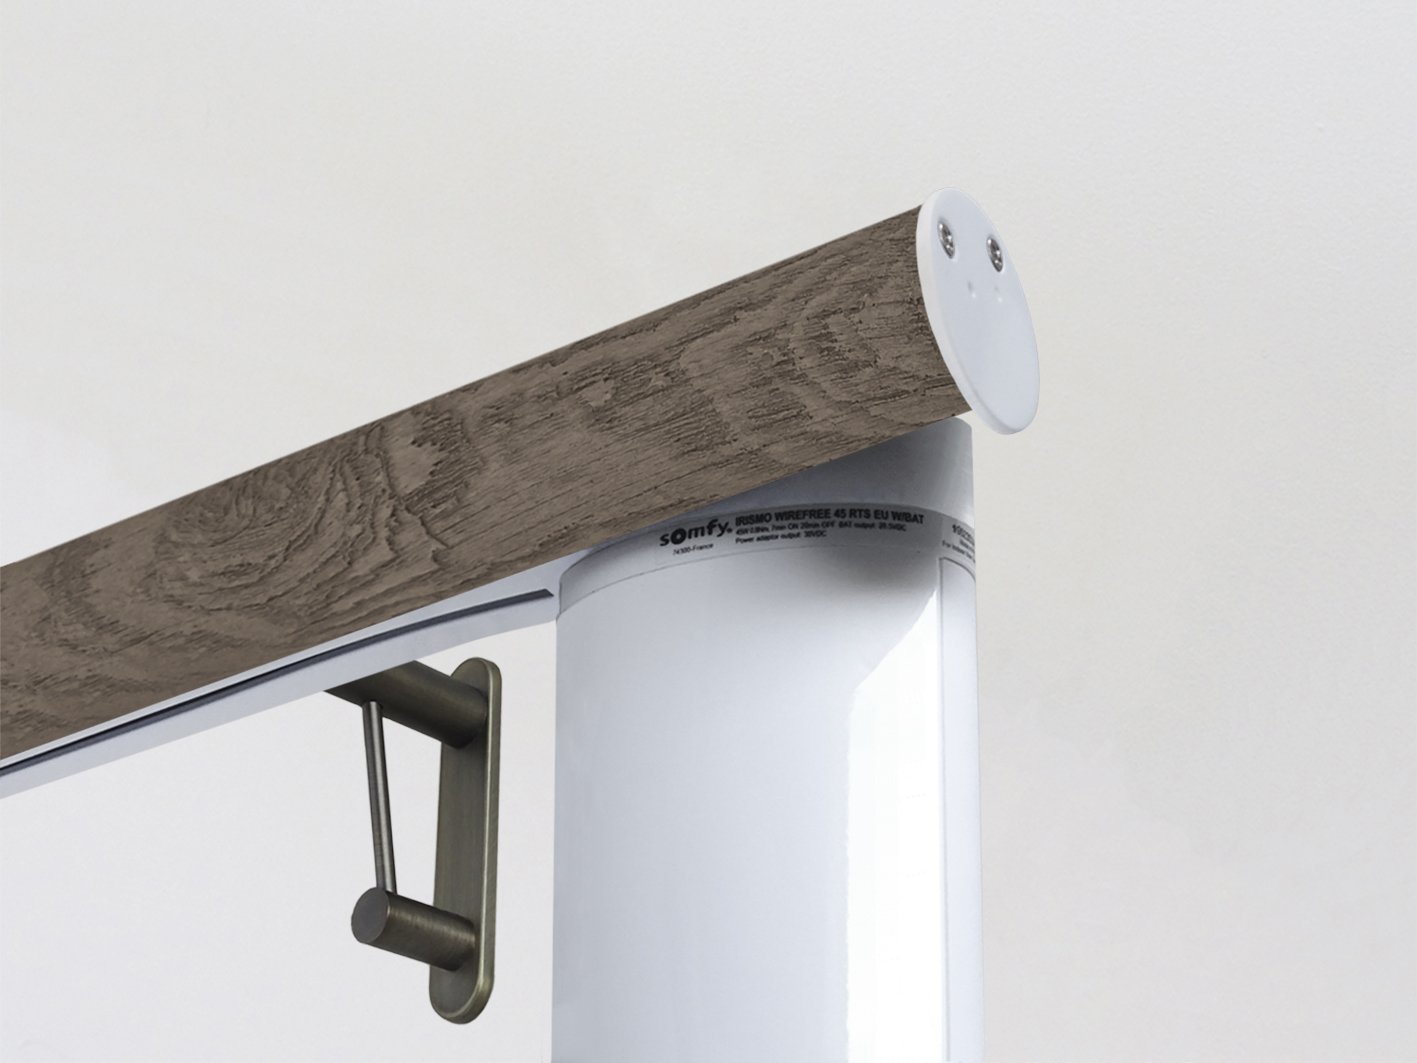 Motorised electric curtain pole in brazil nut brown driftwood, wireless & battery powered using the Somfy Glydea track | Walcot House UK curtain pole specialists